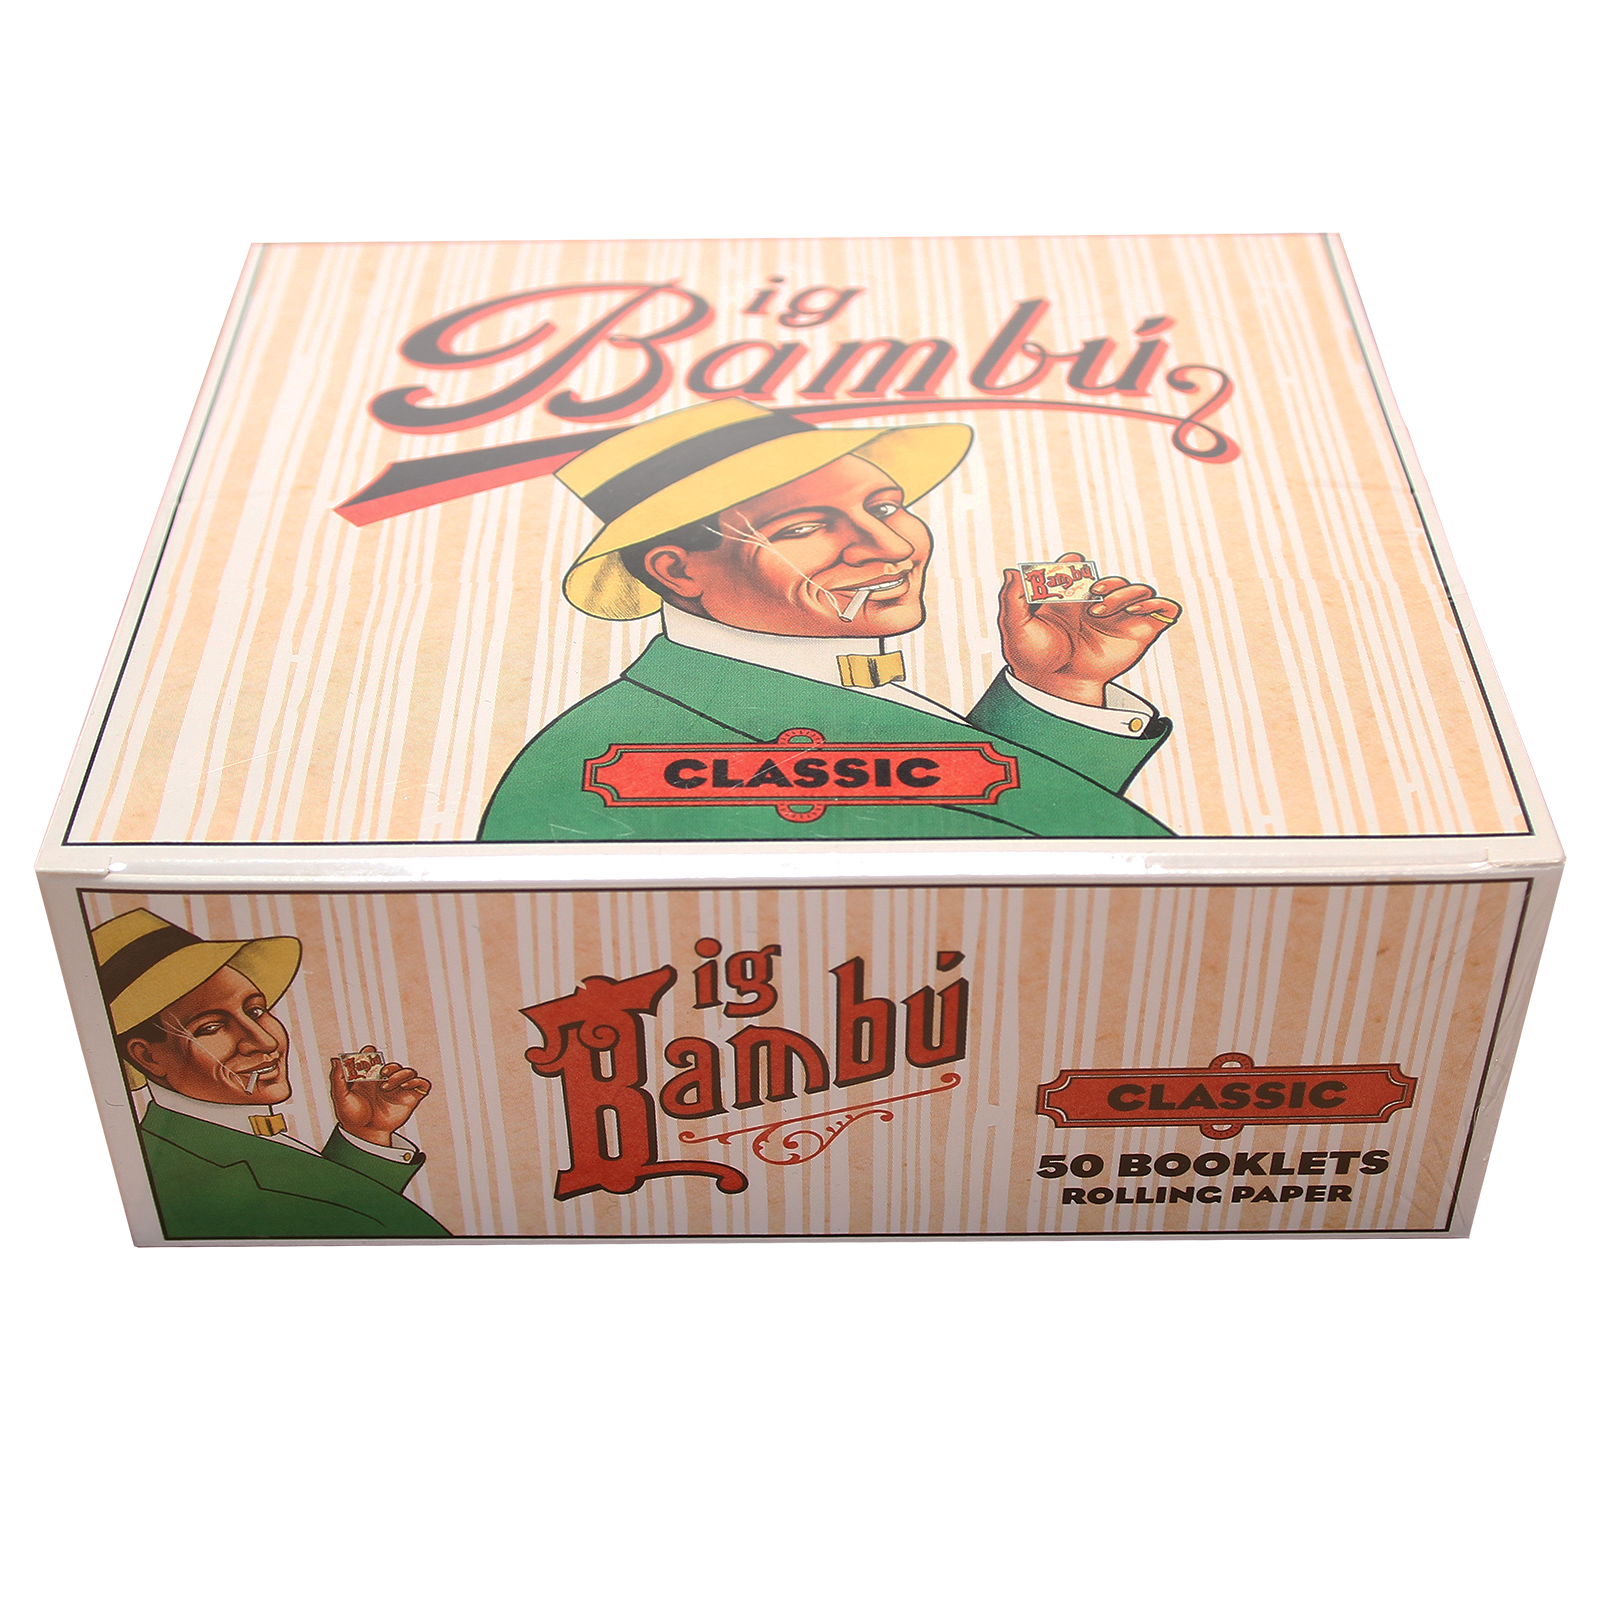 Big Bambú Classic Rolling Papers Wholesale – 1 Box / 50packs